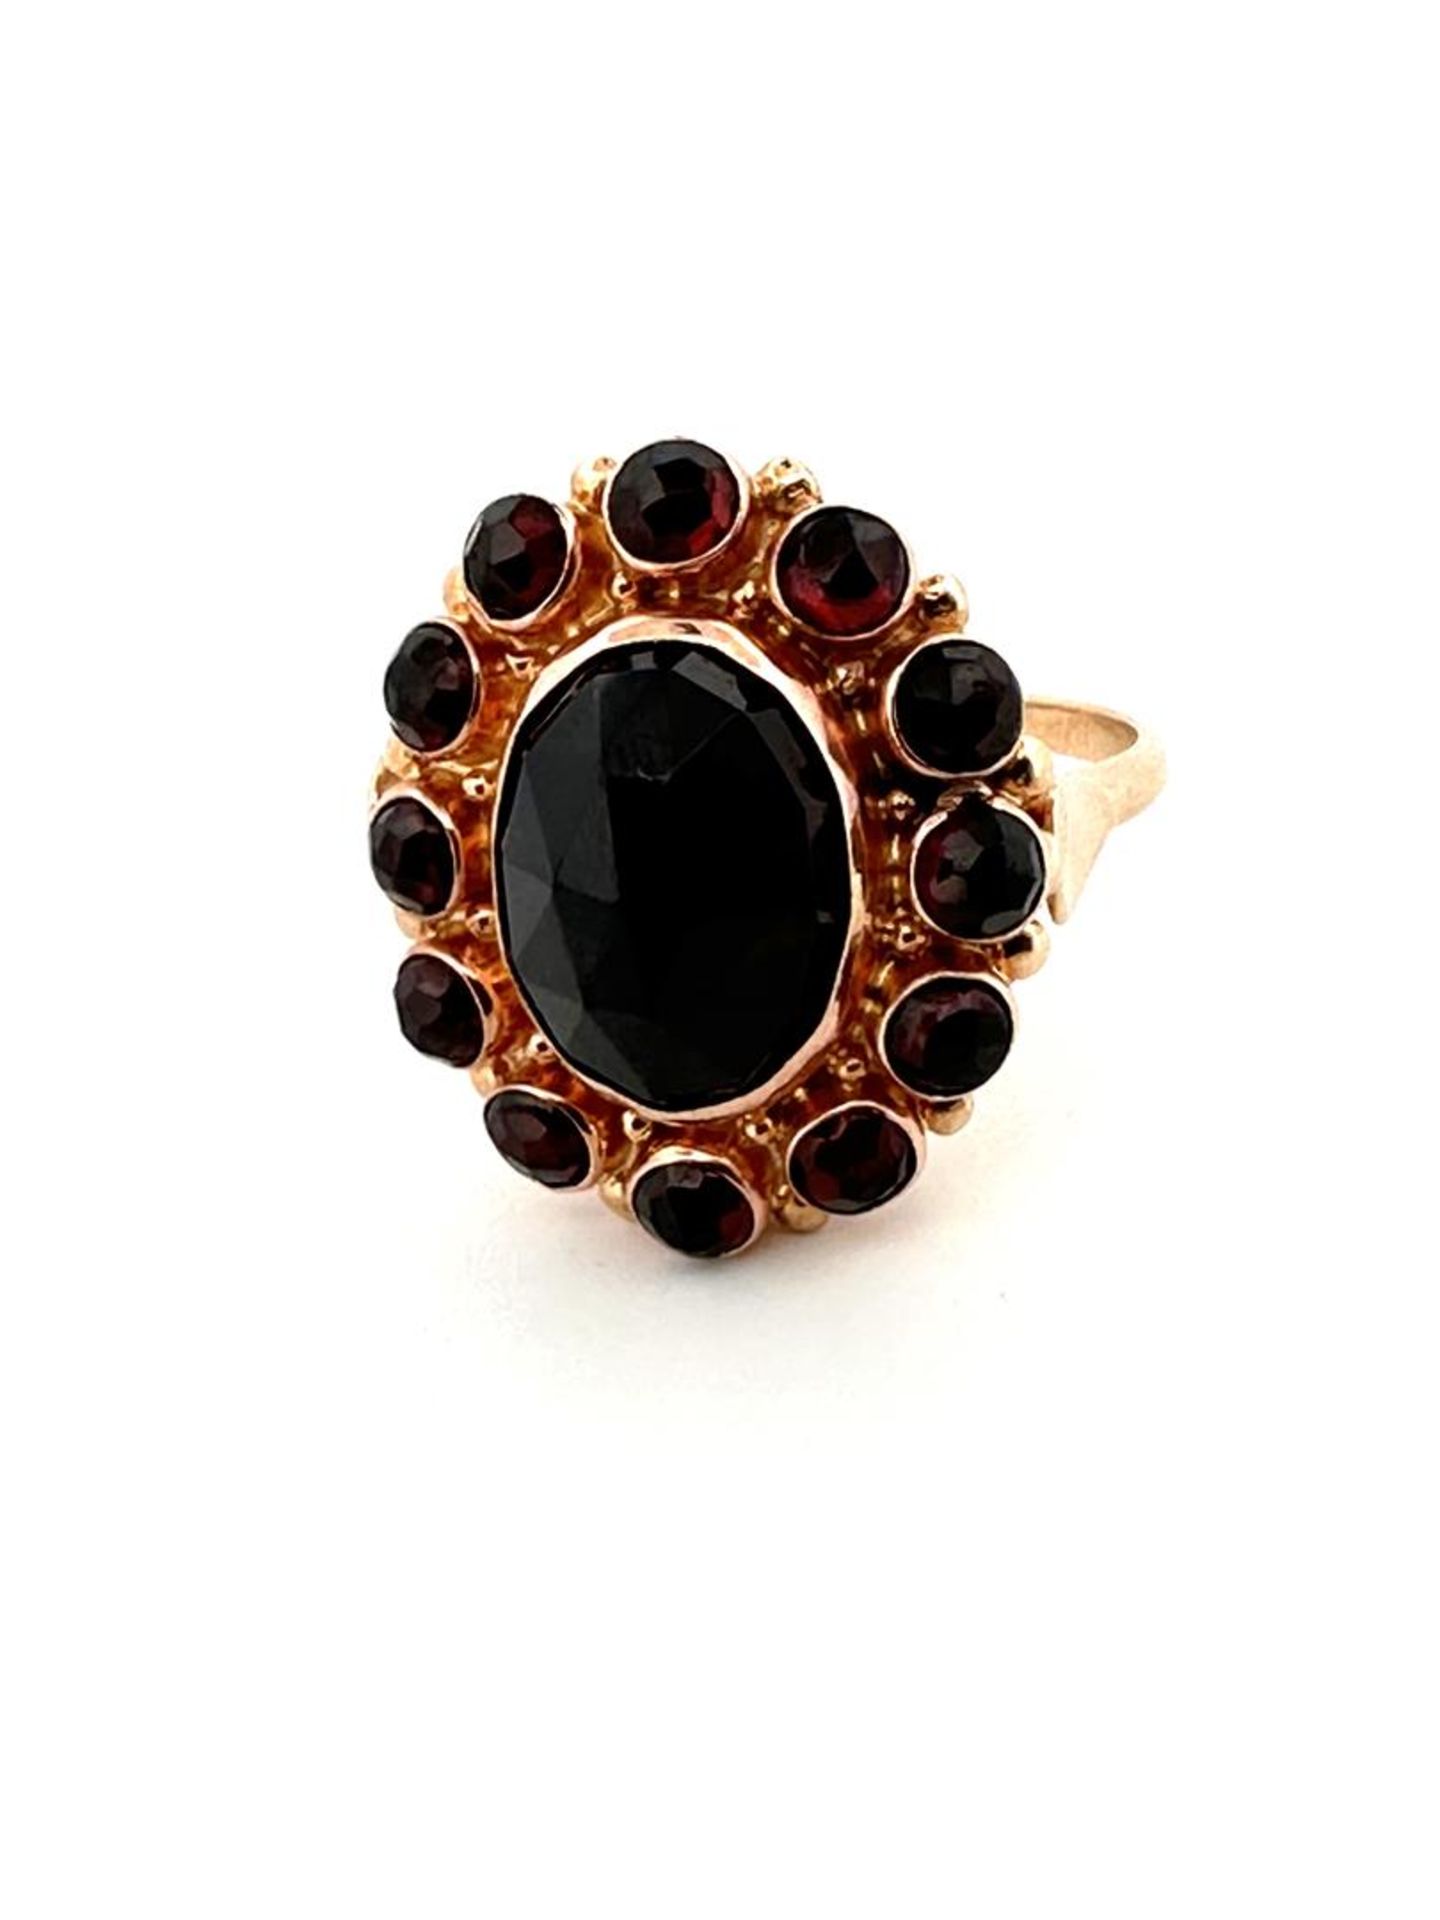 14kt rose gold cocktail ring set with garnet.
The underside of the head is completely closed, so no 